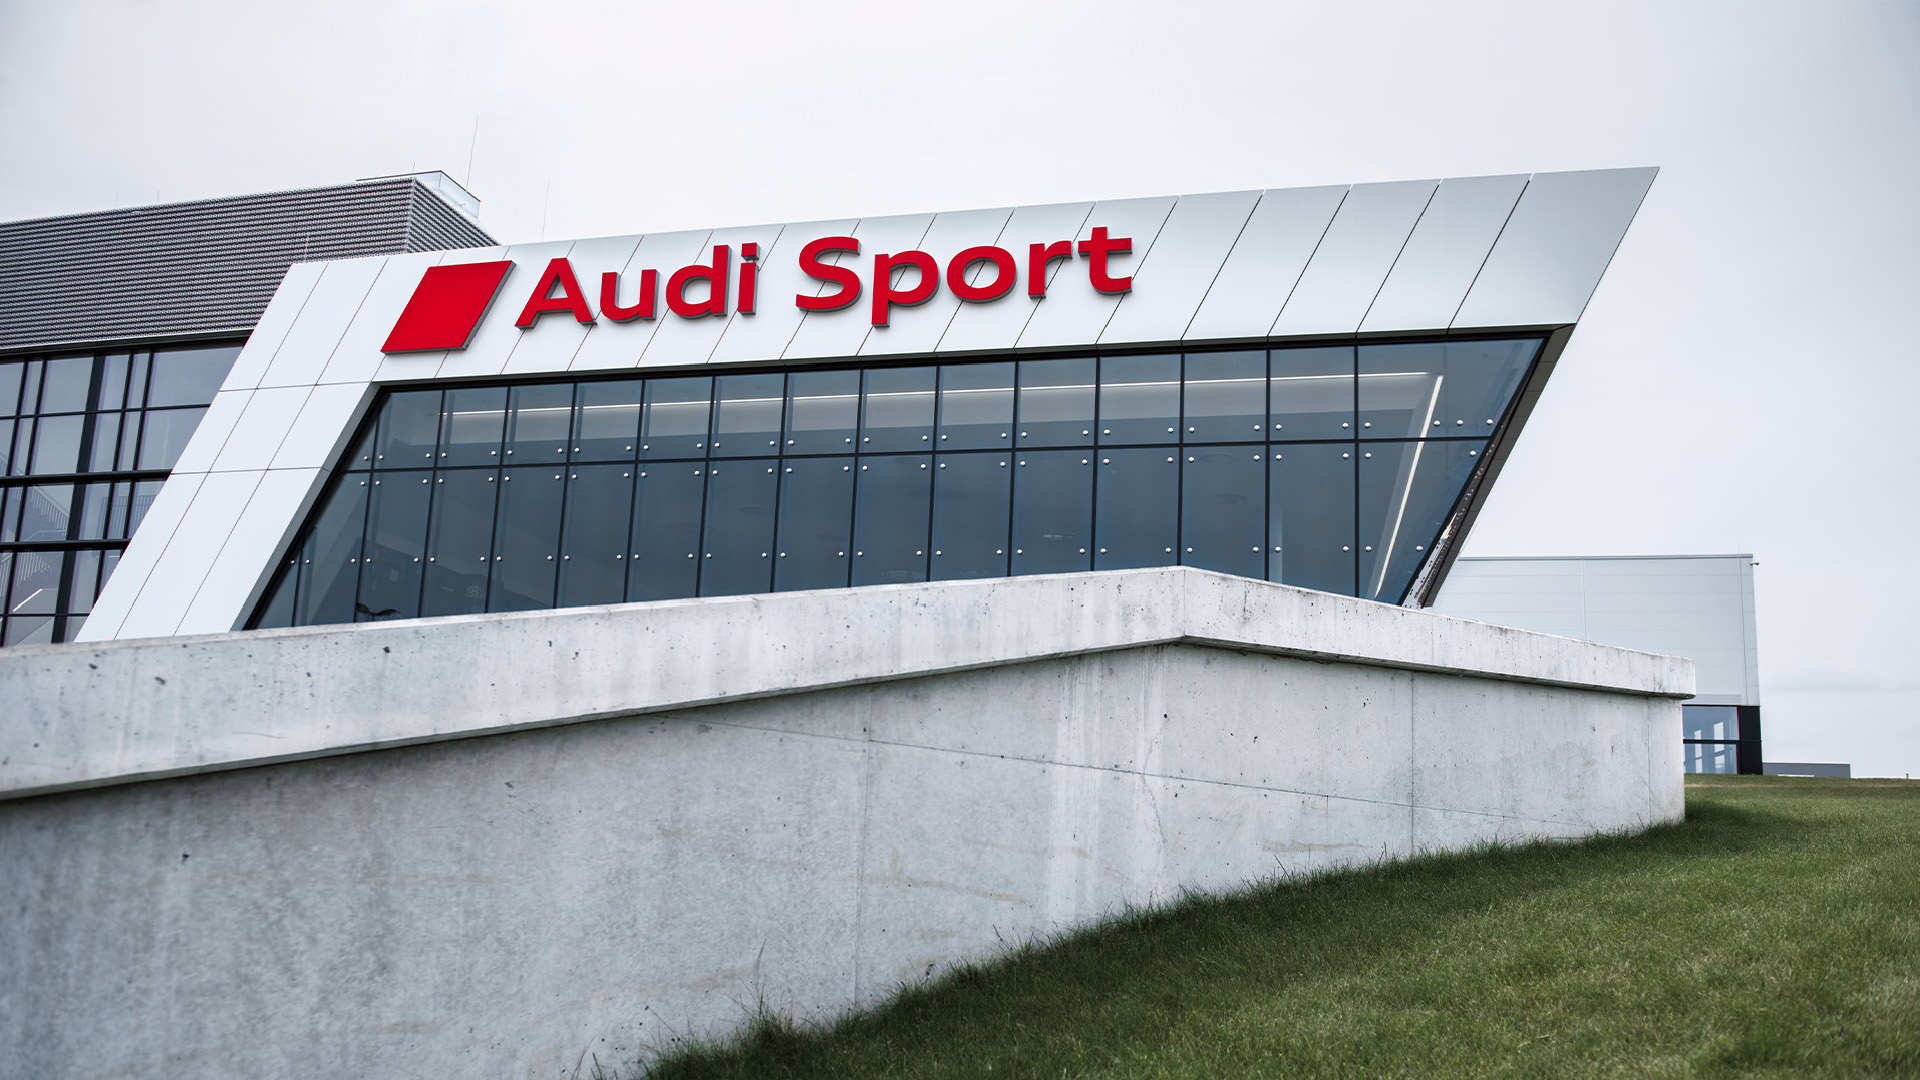 The Audi Sport building can be seen behind a small wall.